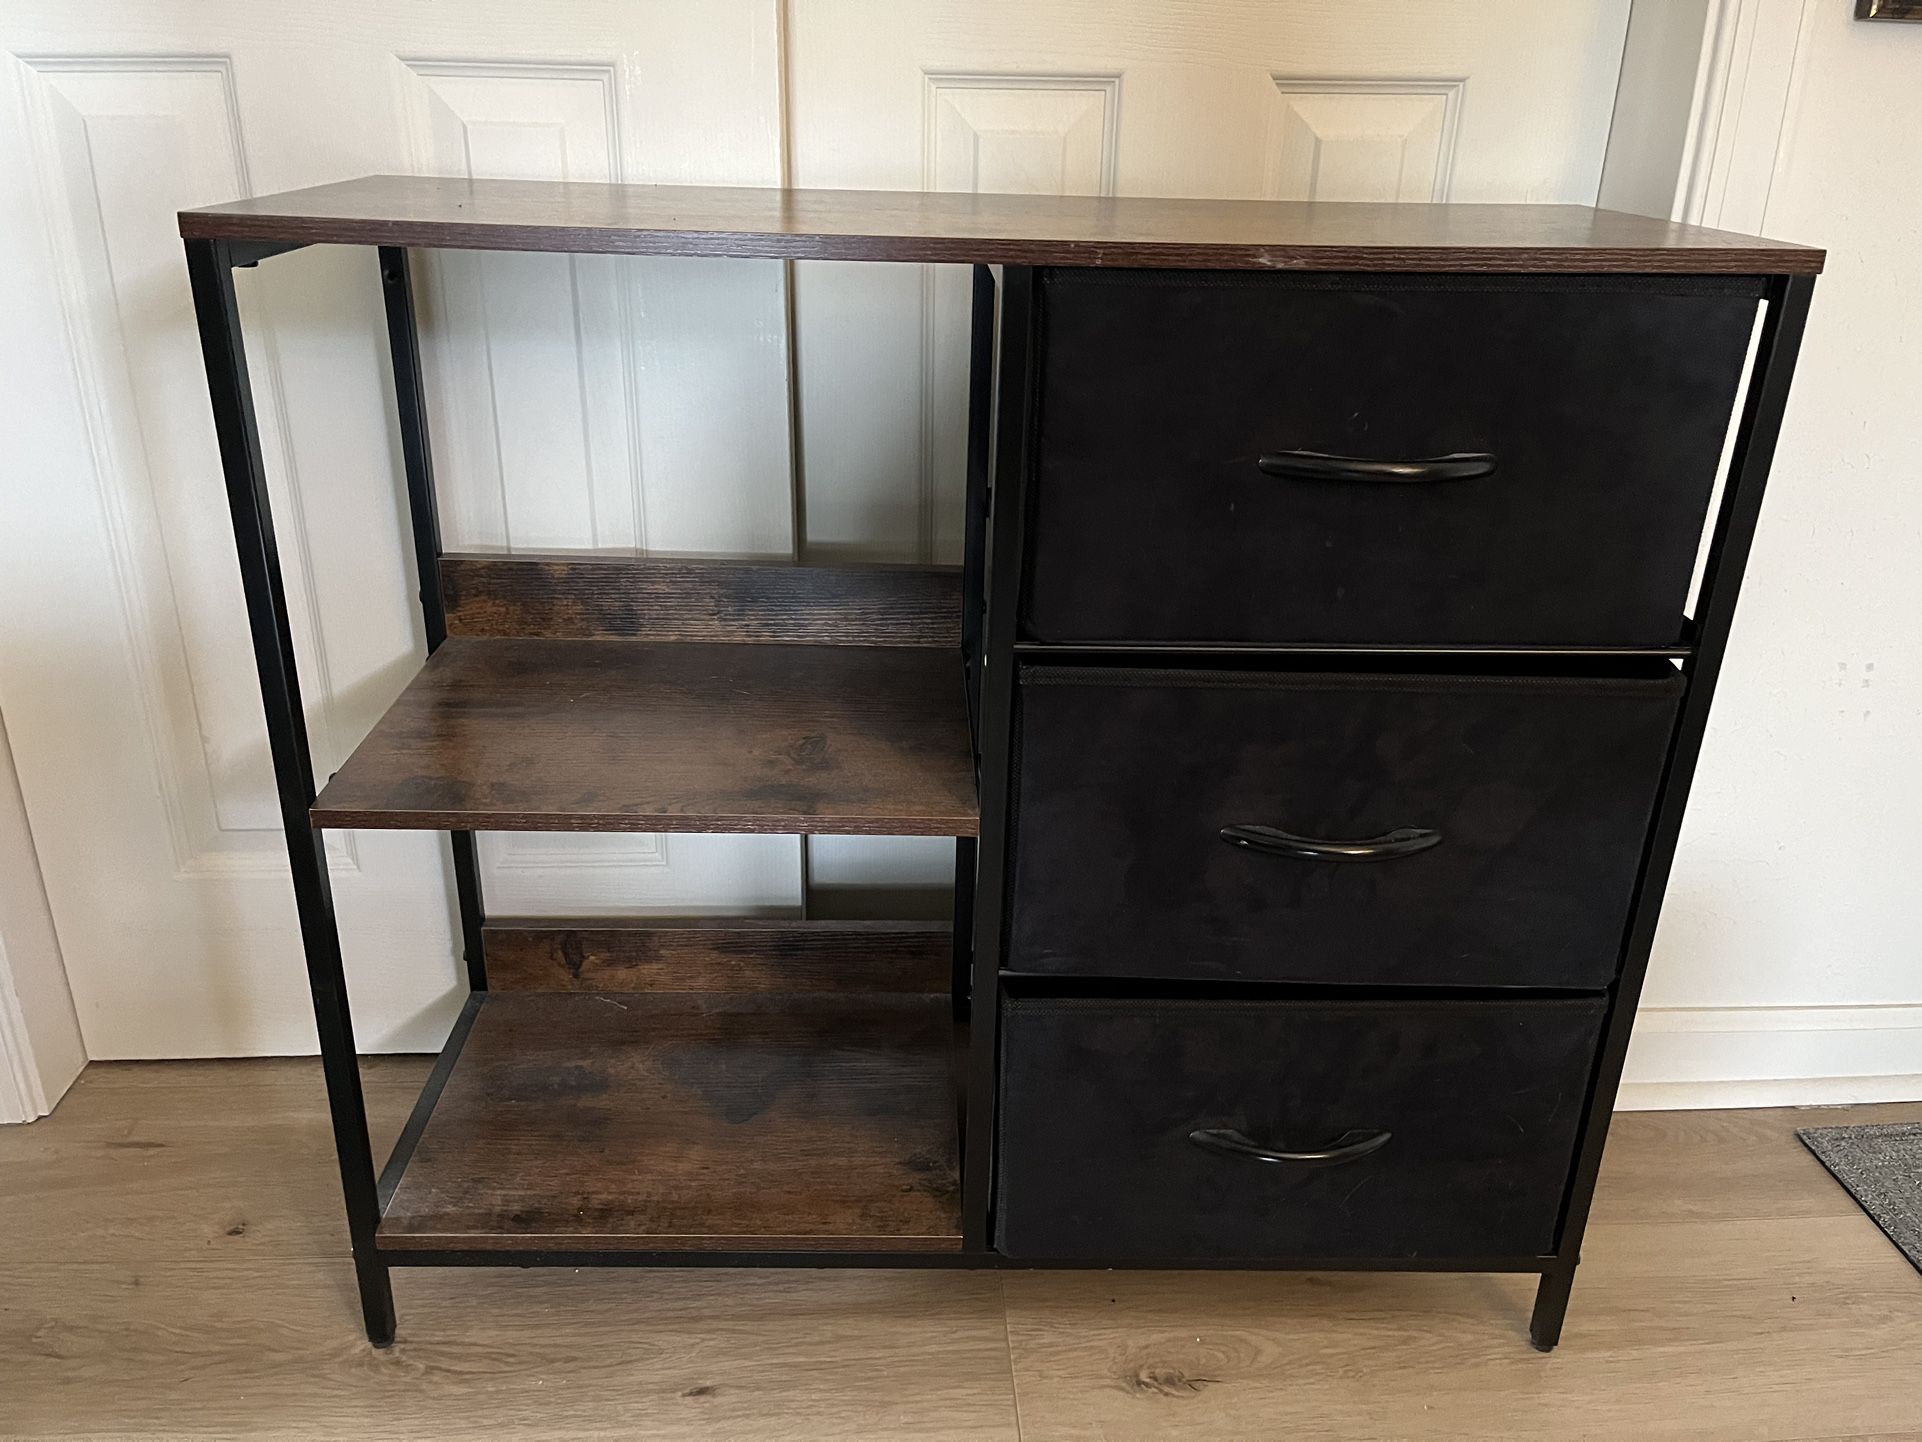 Accent Table With Shelves/drawers